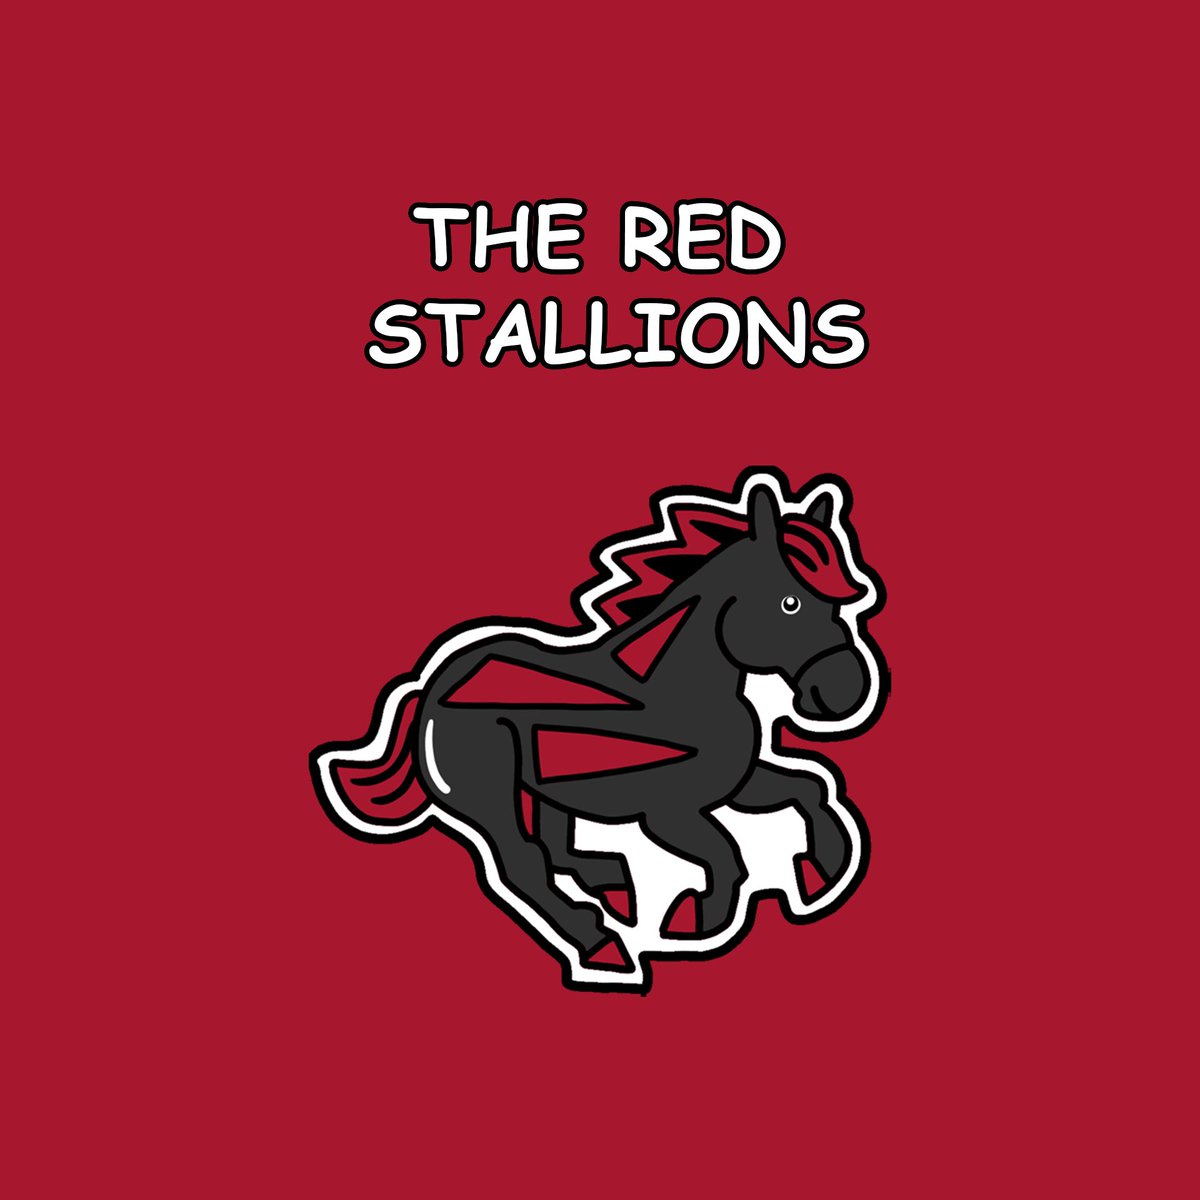 Atlanta Falcons on to the Atlanta Red Stallions See you again Week 8 😏 Rawr https://t.co/VXV3hBmnzZ" / Twitter